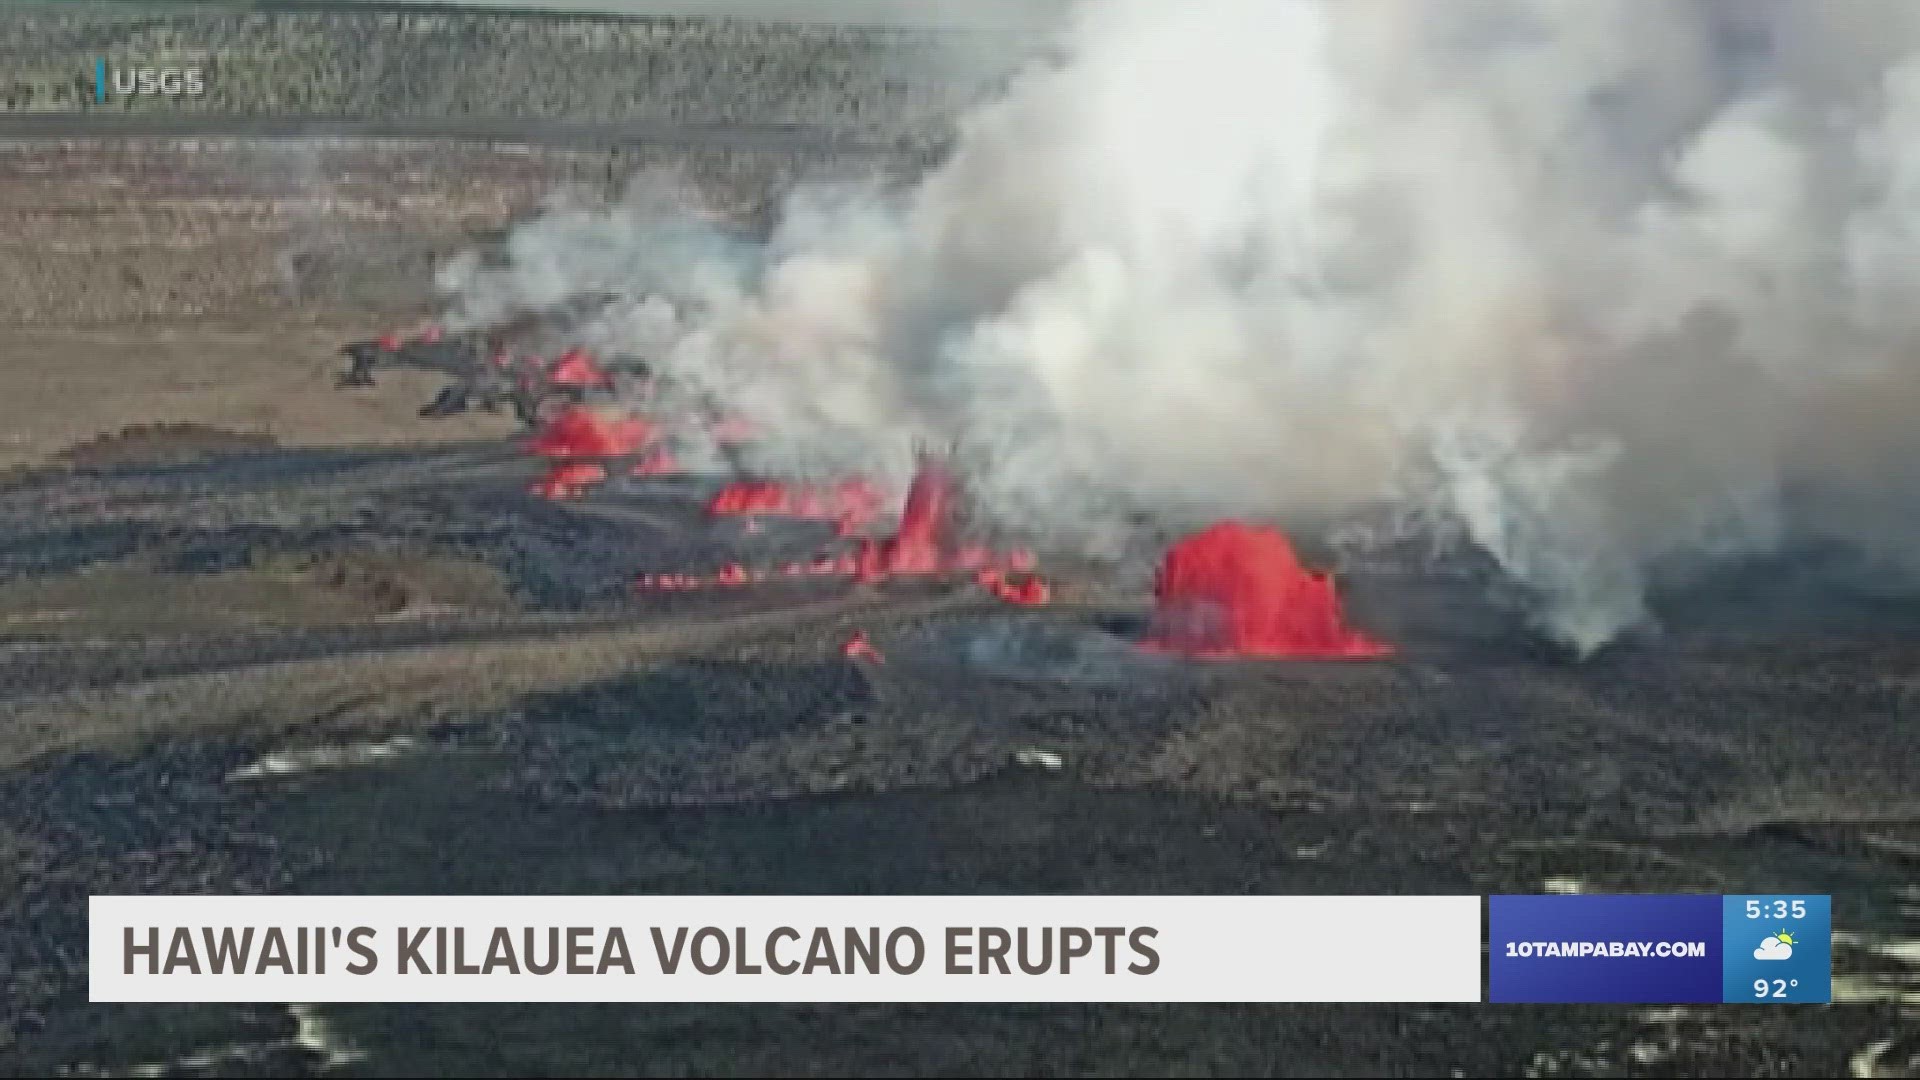 Kilauea, Hawaii’s second largest volcano, erupted from September 2021 until last December.